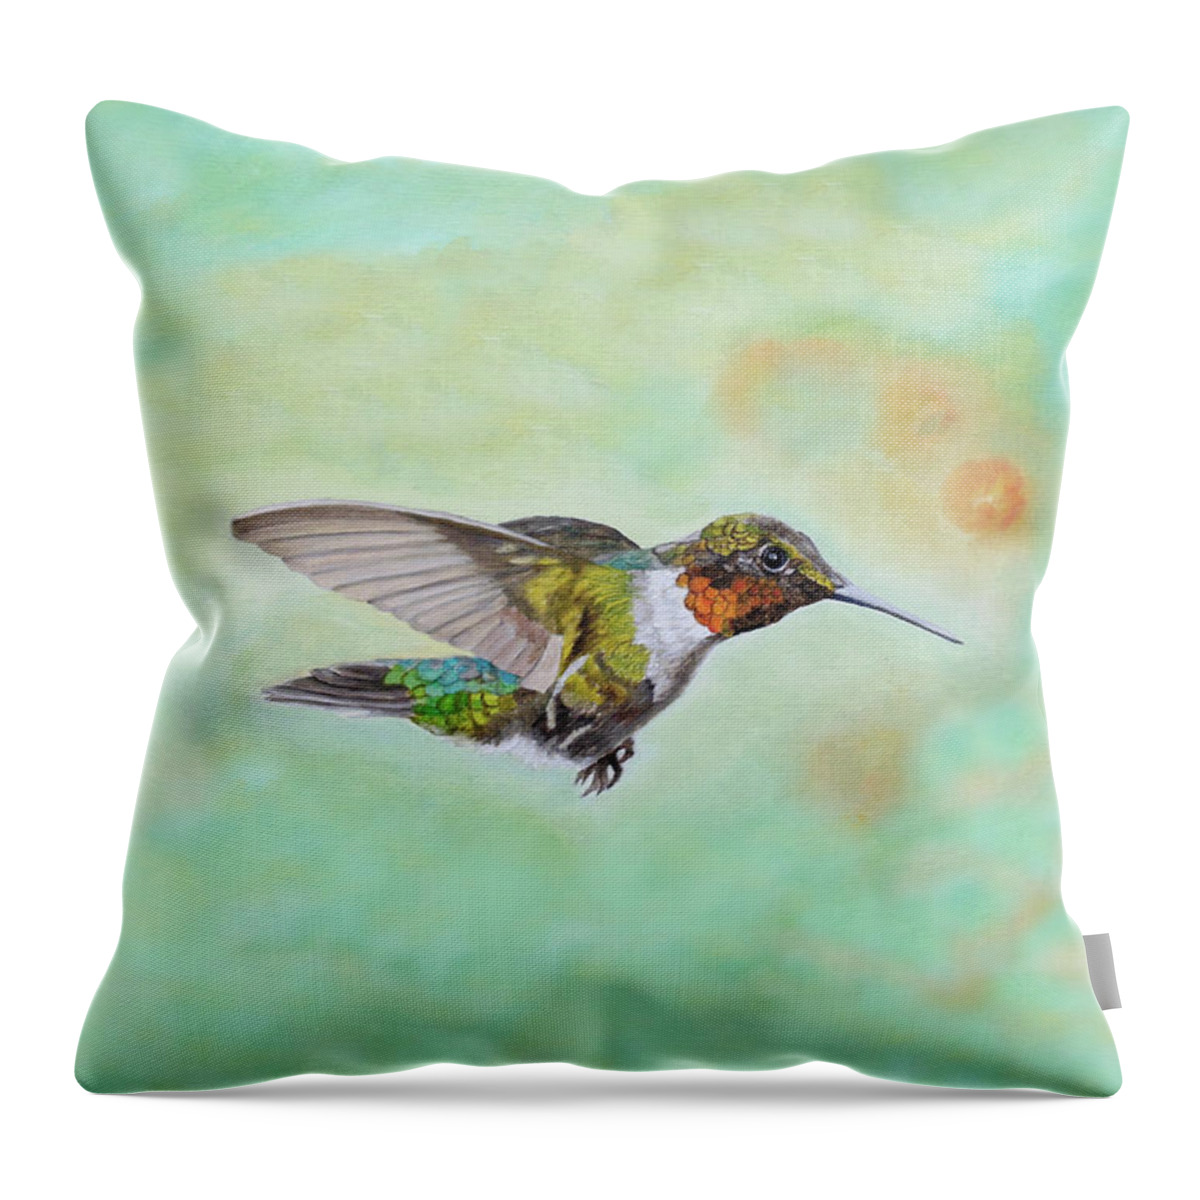 Hummingbird Throw Pillow featuring the painting Motley Flying Hummer by Angeles M Pomata